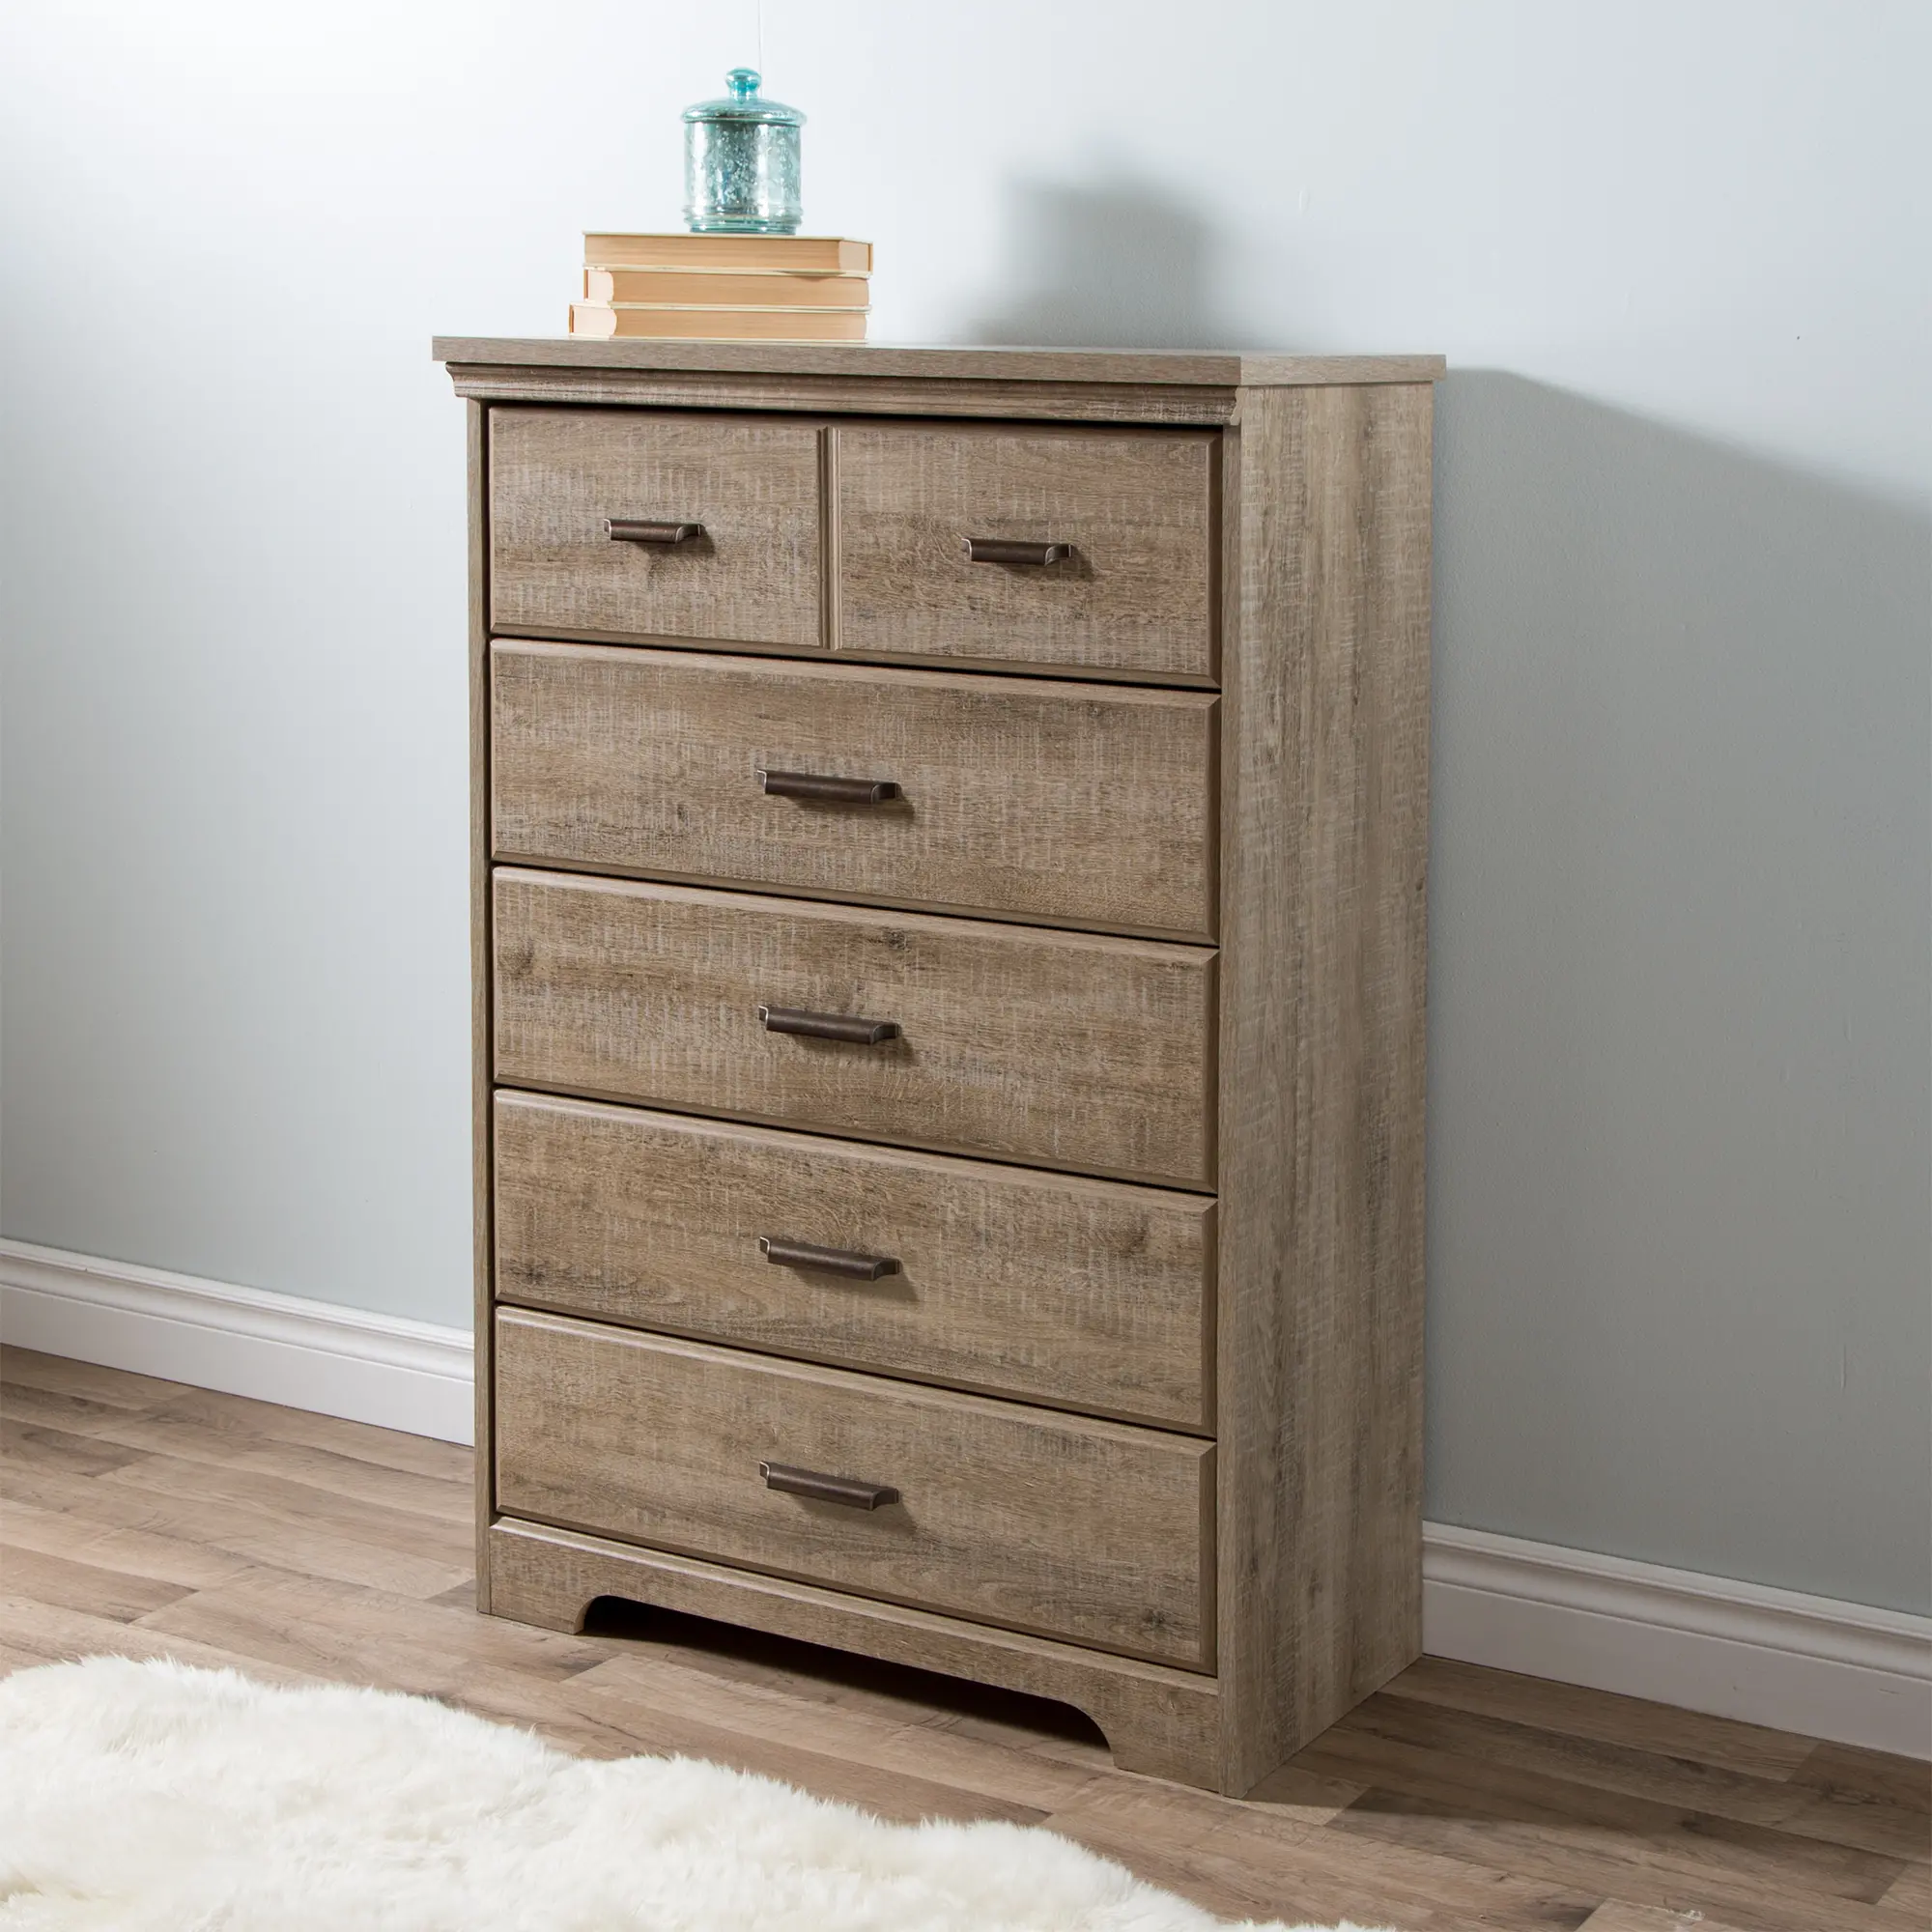 Photos - Dresser / Chests of Drawers South Shore Versa Casual Contemporary Weathered Oak 5-Drawer Chest - South